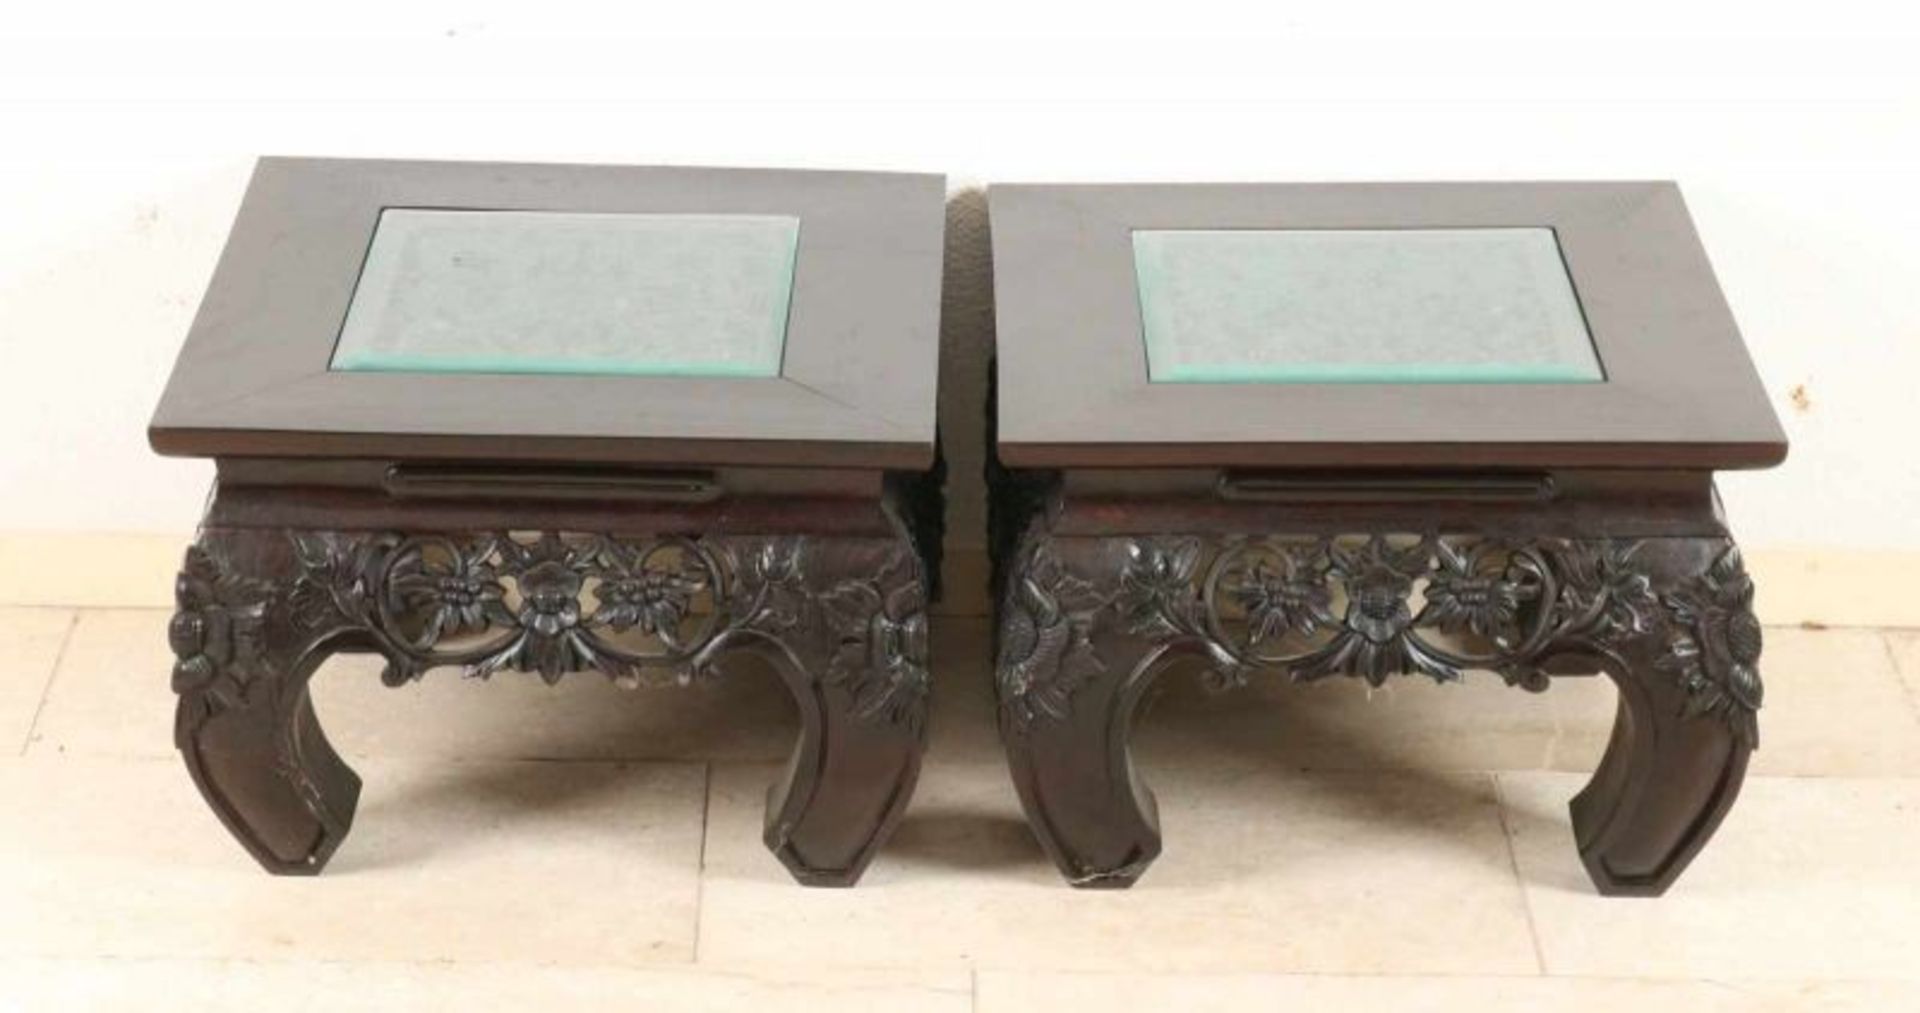 Two Oriental carved teak side tables. 20th century. Size: 35 x 50 x 50 cm. In good condition.